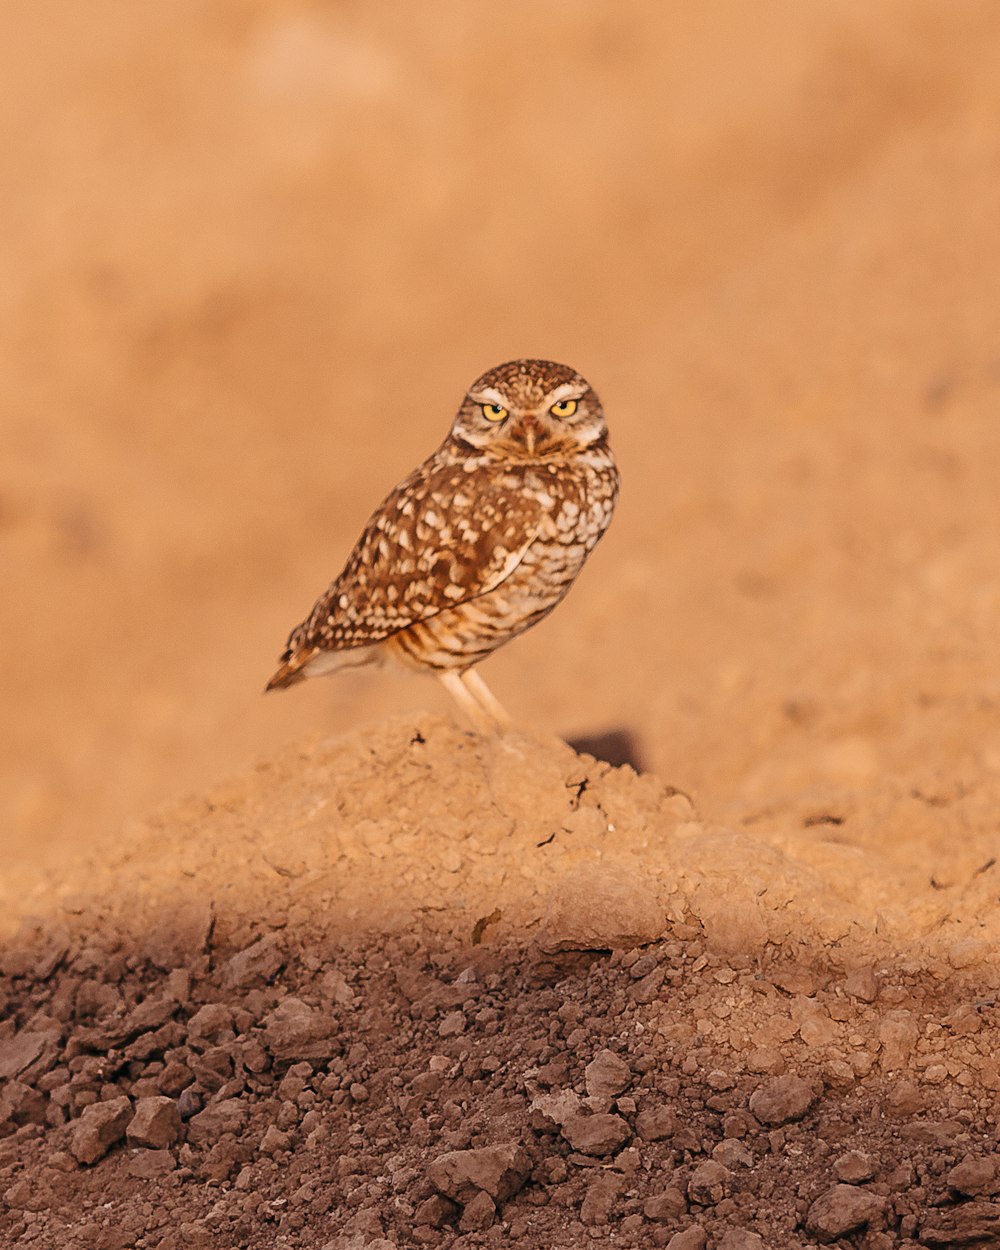 brown and white owl on brown sand during daytime